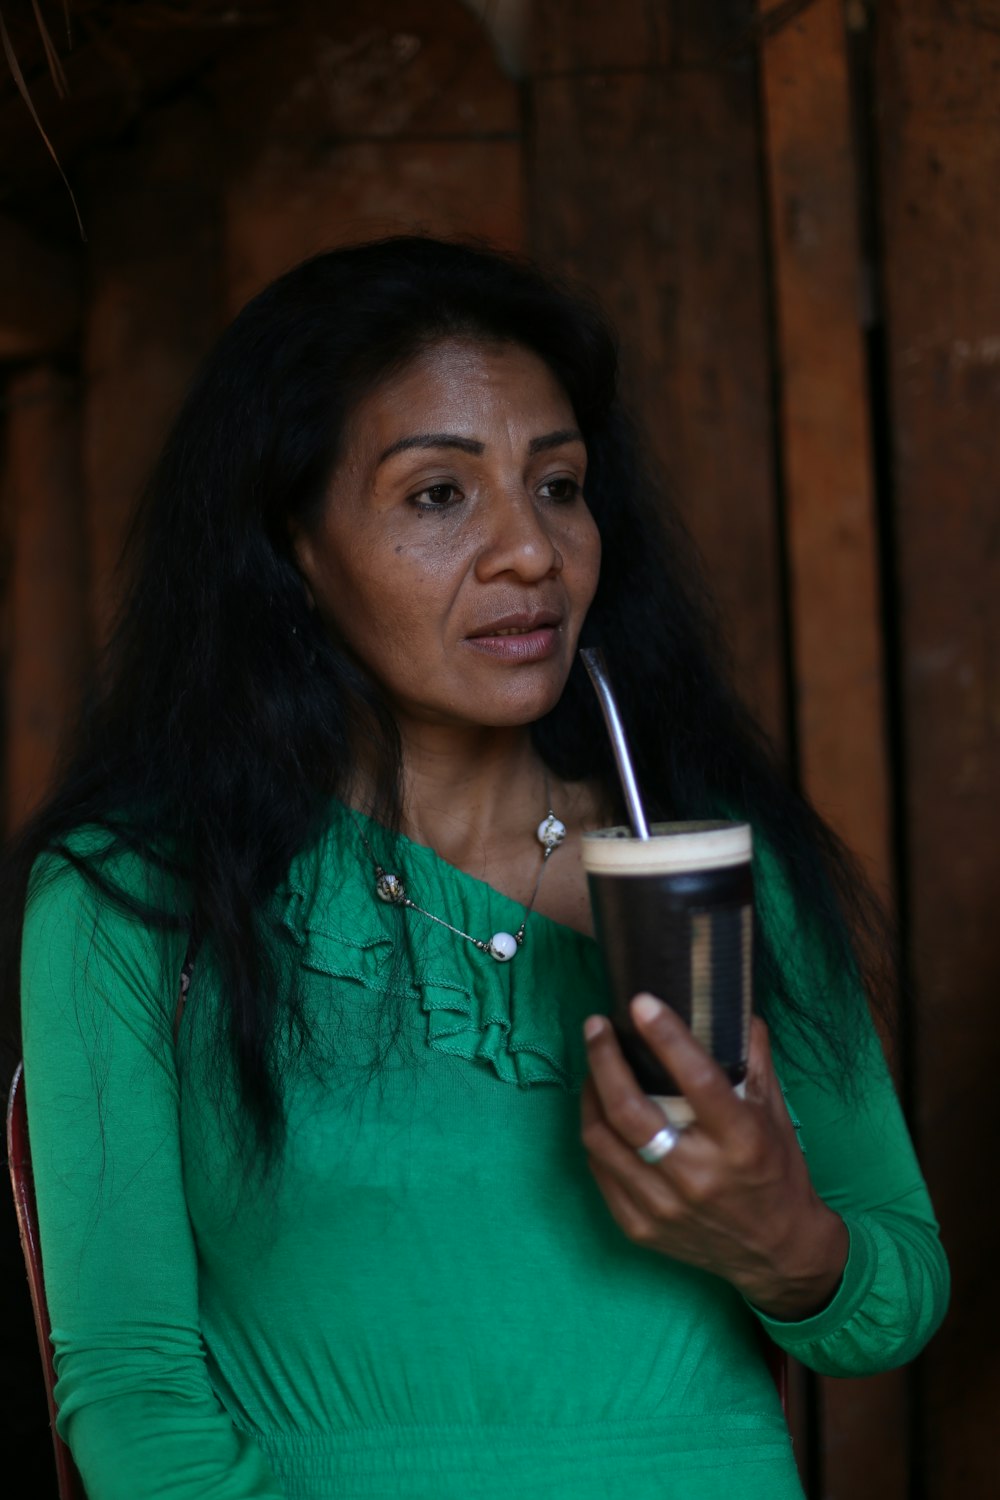 a woman in a green shirt holding a drink